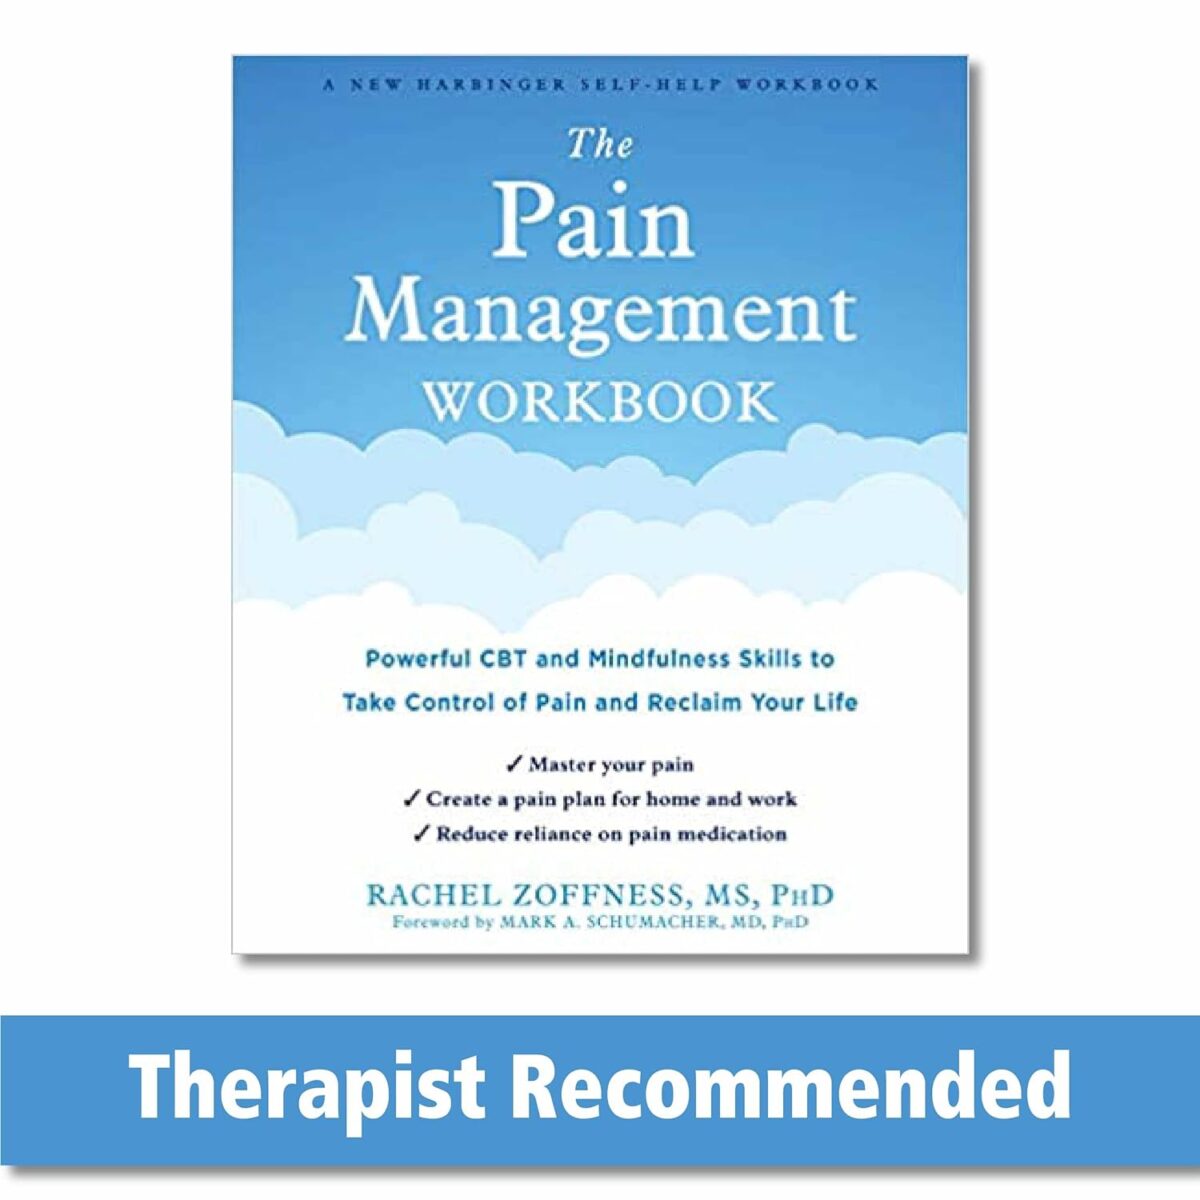 Featured Image for The Pain Management Workbook: Powerful CBT and Mindfulness Skills to Take Control of Pain and Reclaim Your Life